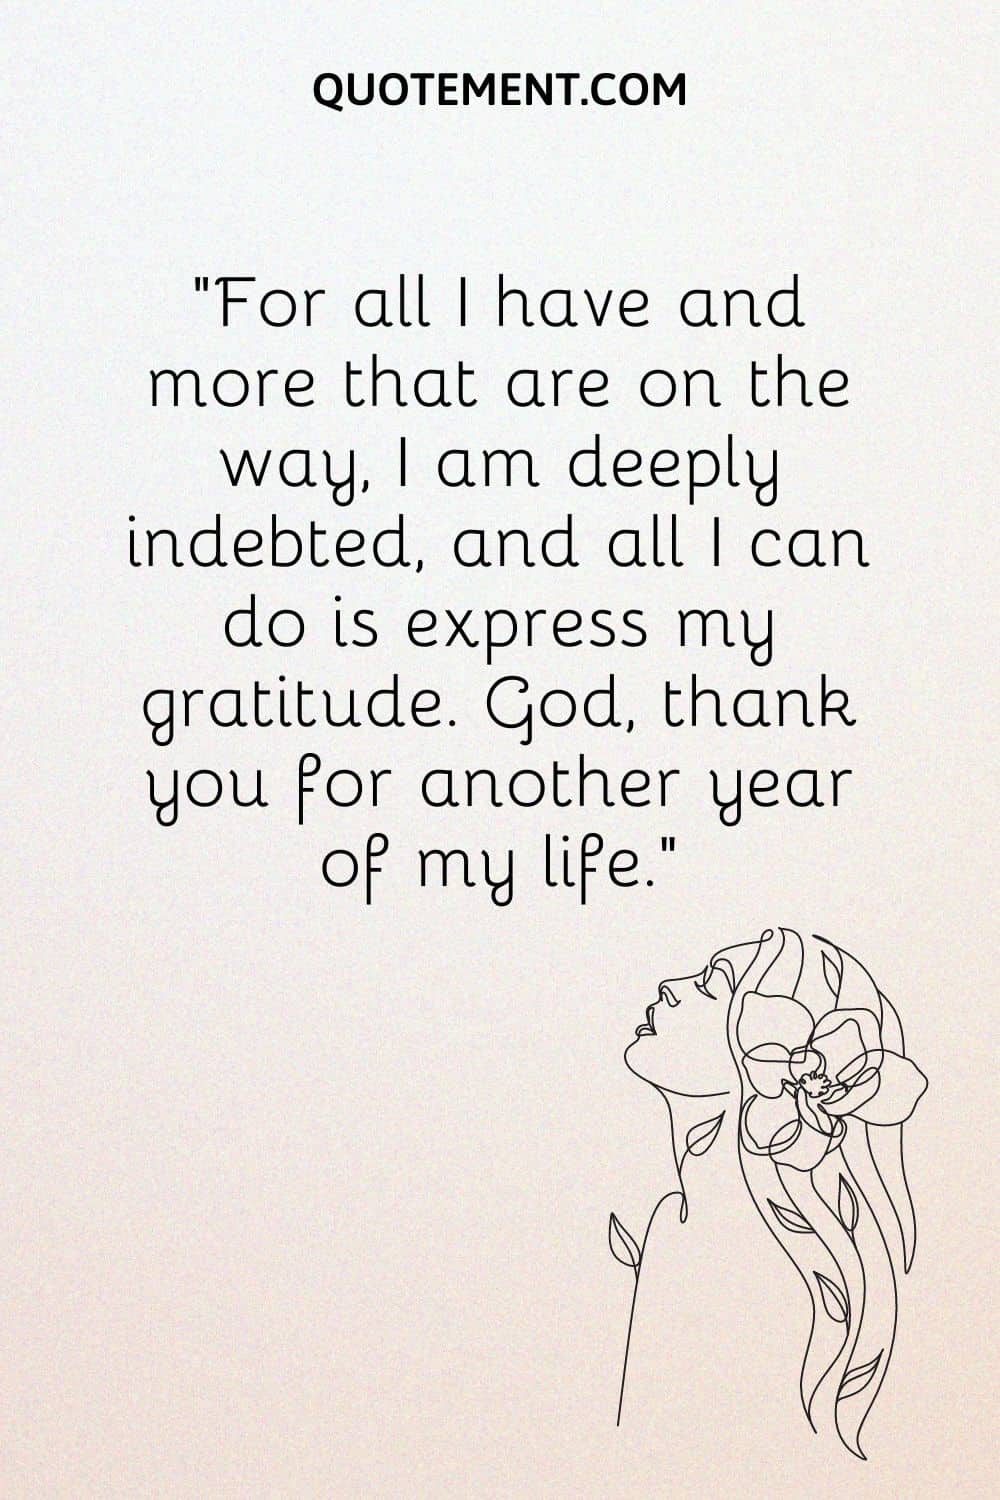 For all I have and more that are on the way, I am deeply indebted, and all I can do is express my gratitude